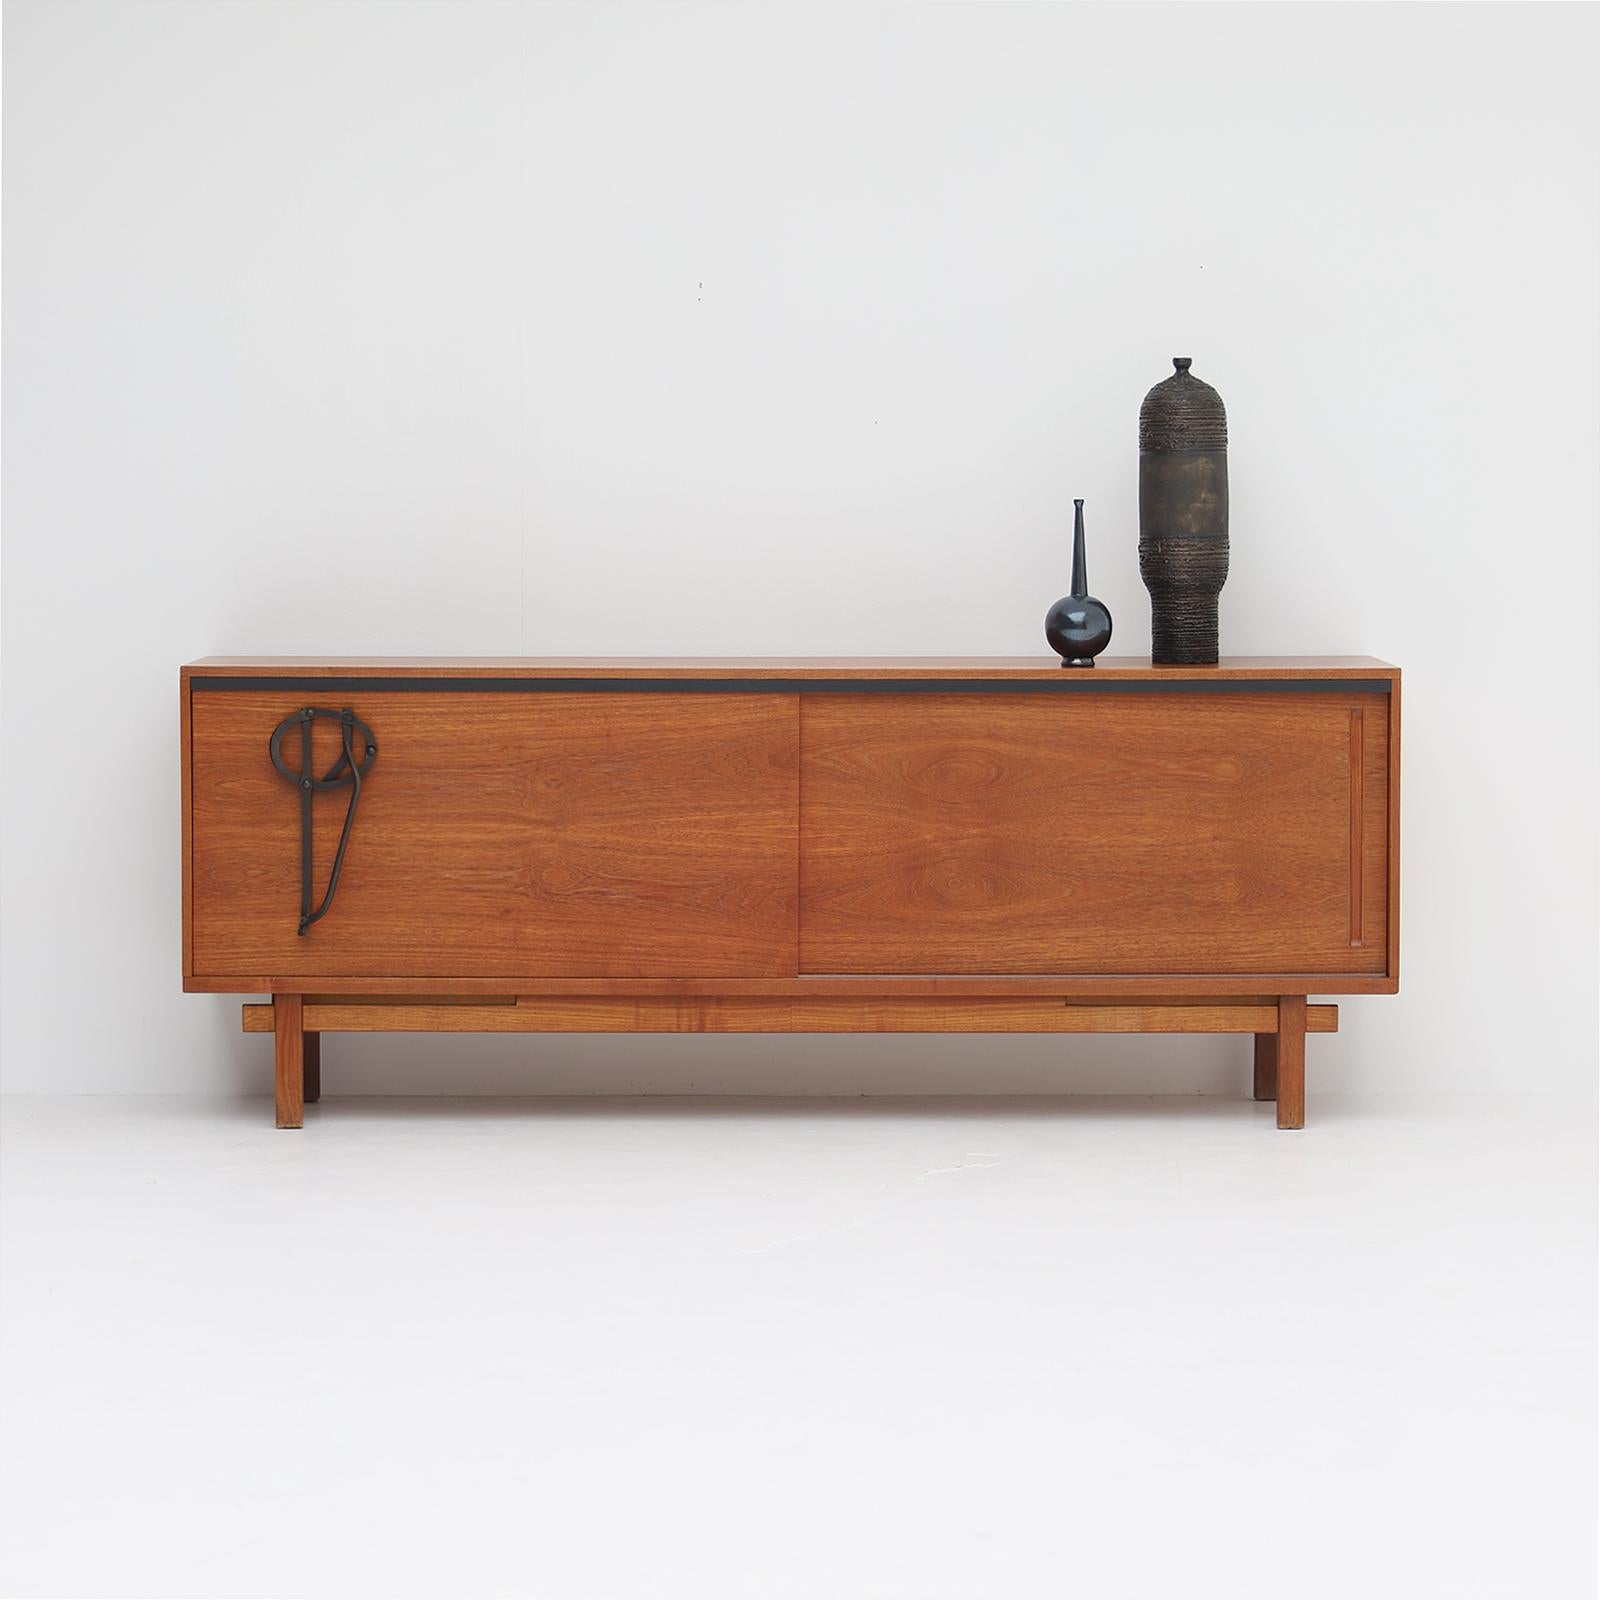 This sideboard is as unique as its background. A collaboration between two Belgian artists, each exceptional in their own field. Jean Batenburg and Emiel Souply were both living and working in the Brussels area. Jean Batenburg was a figurative